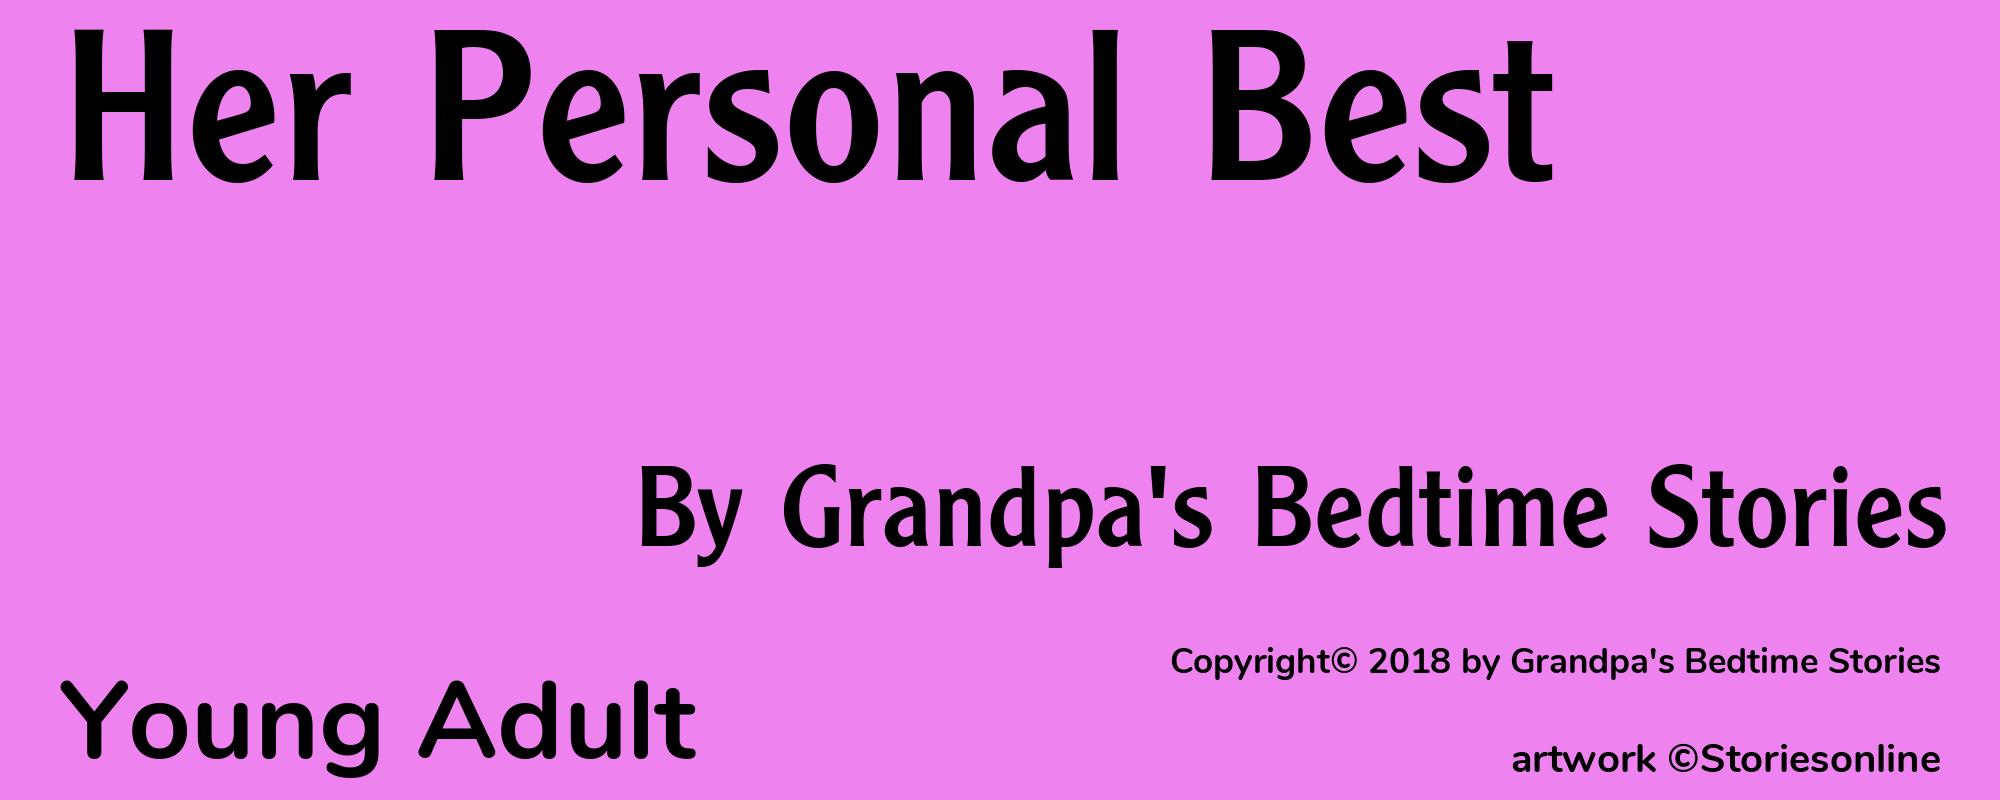 Her Personal Best - Cover